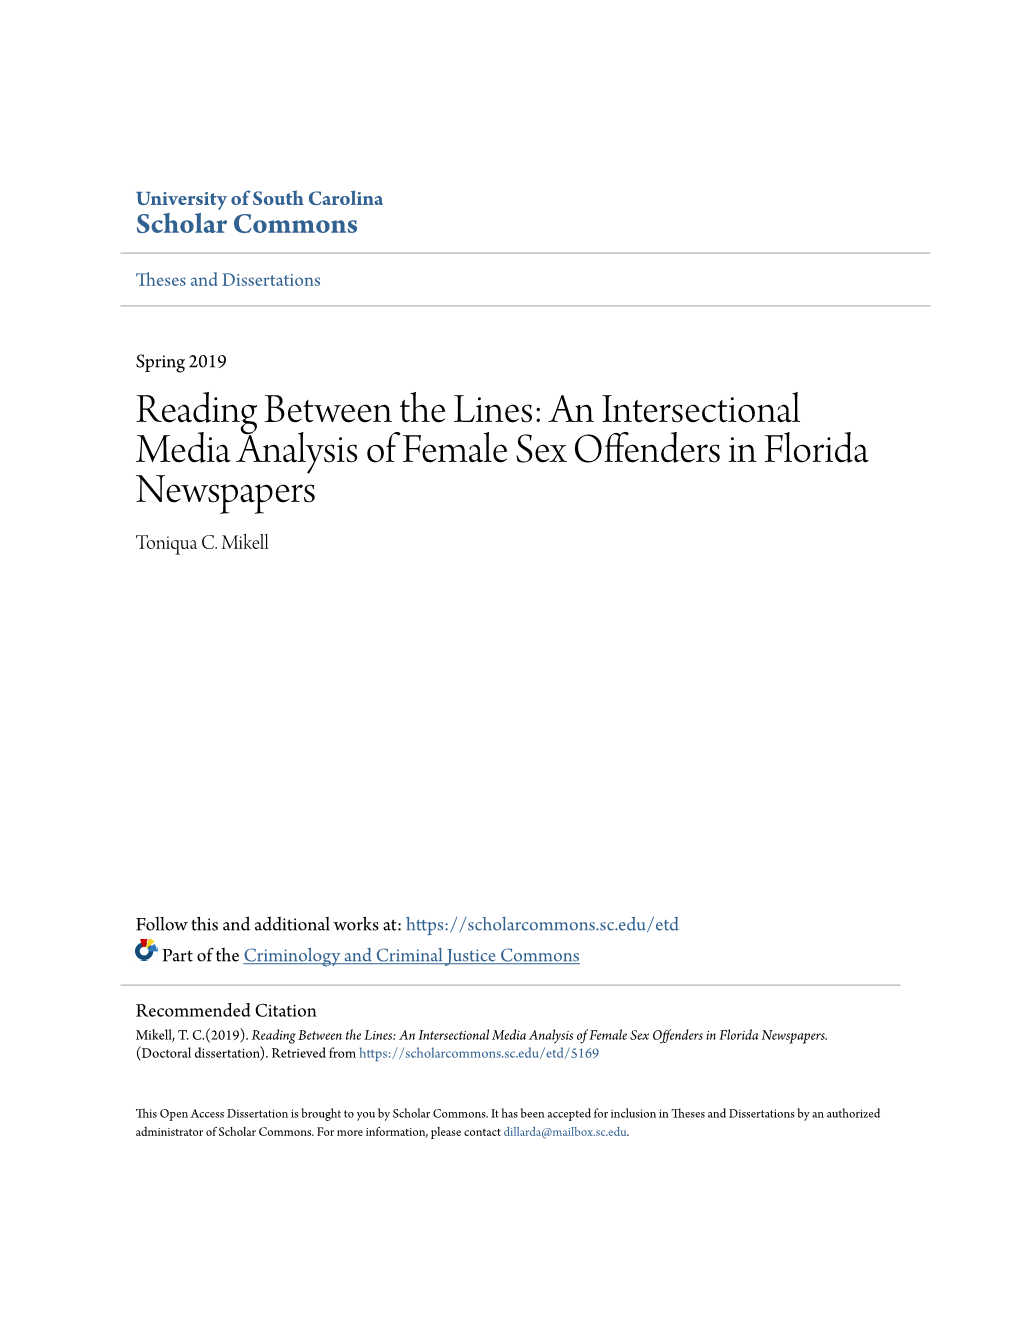 Reading Between the Lines: an Intersectional Media Analysis of Female Sex Offenders in Florida Newspapers Toniqua C